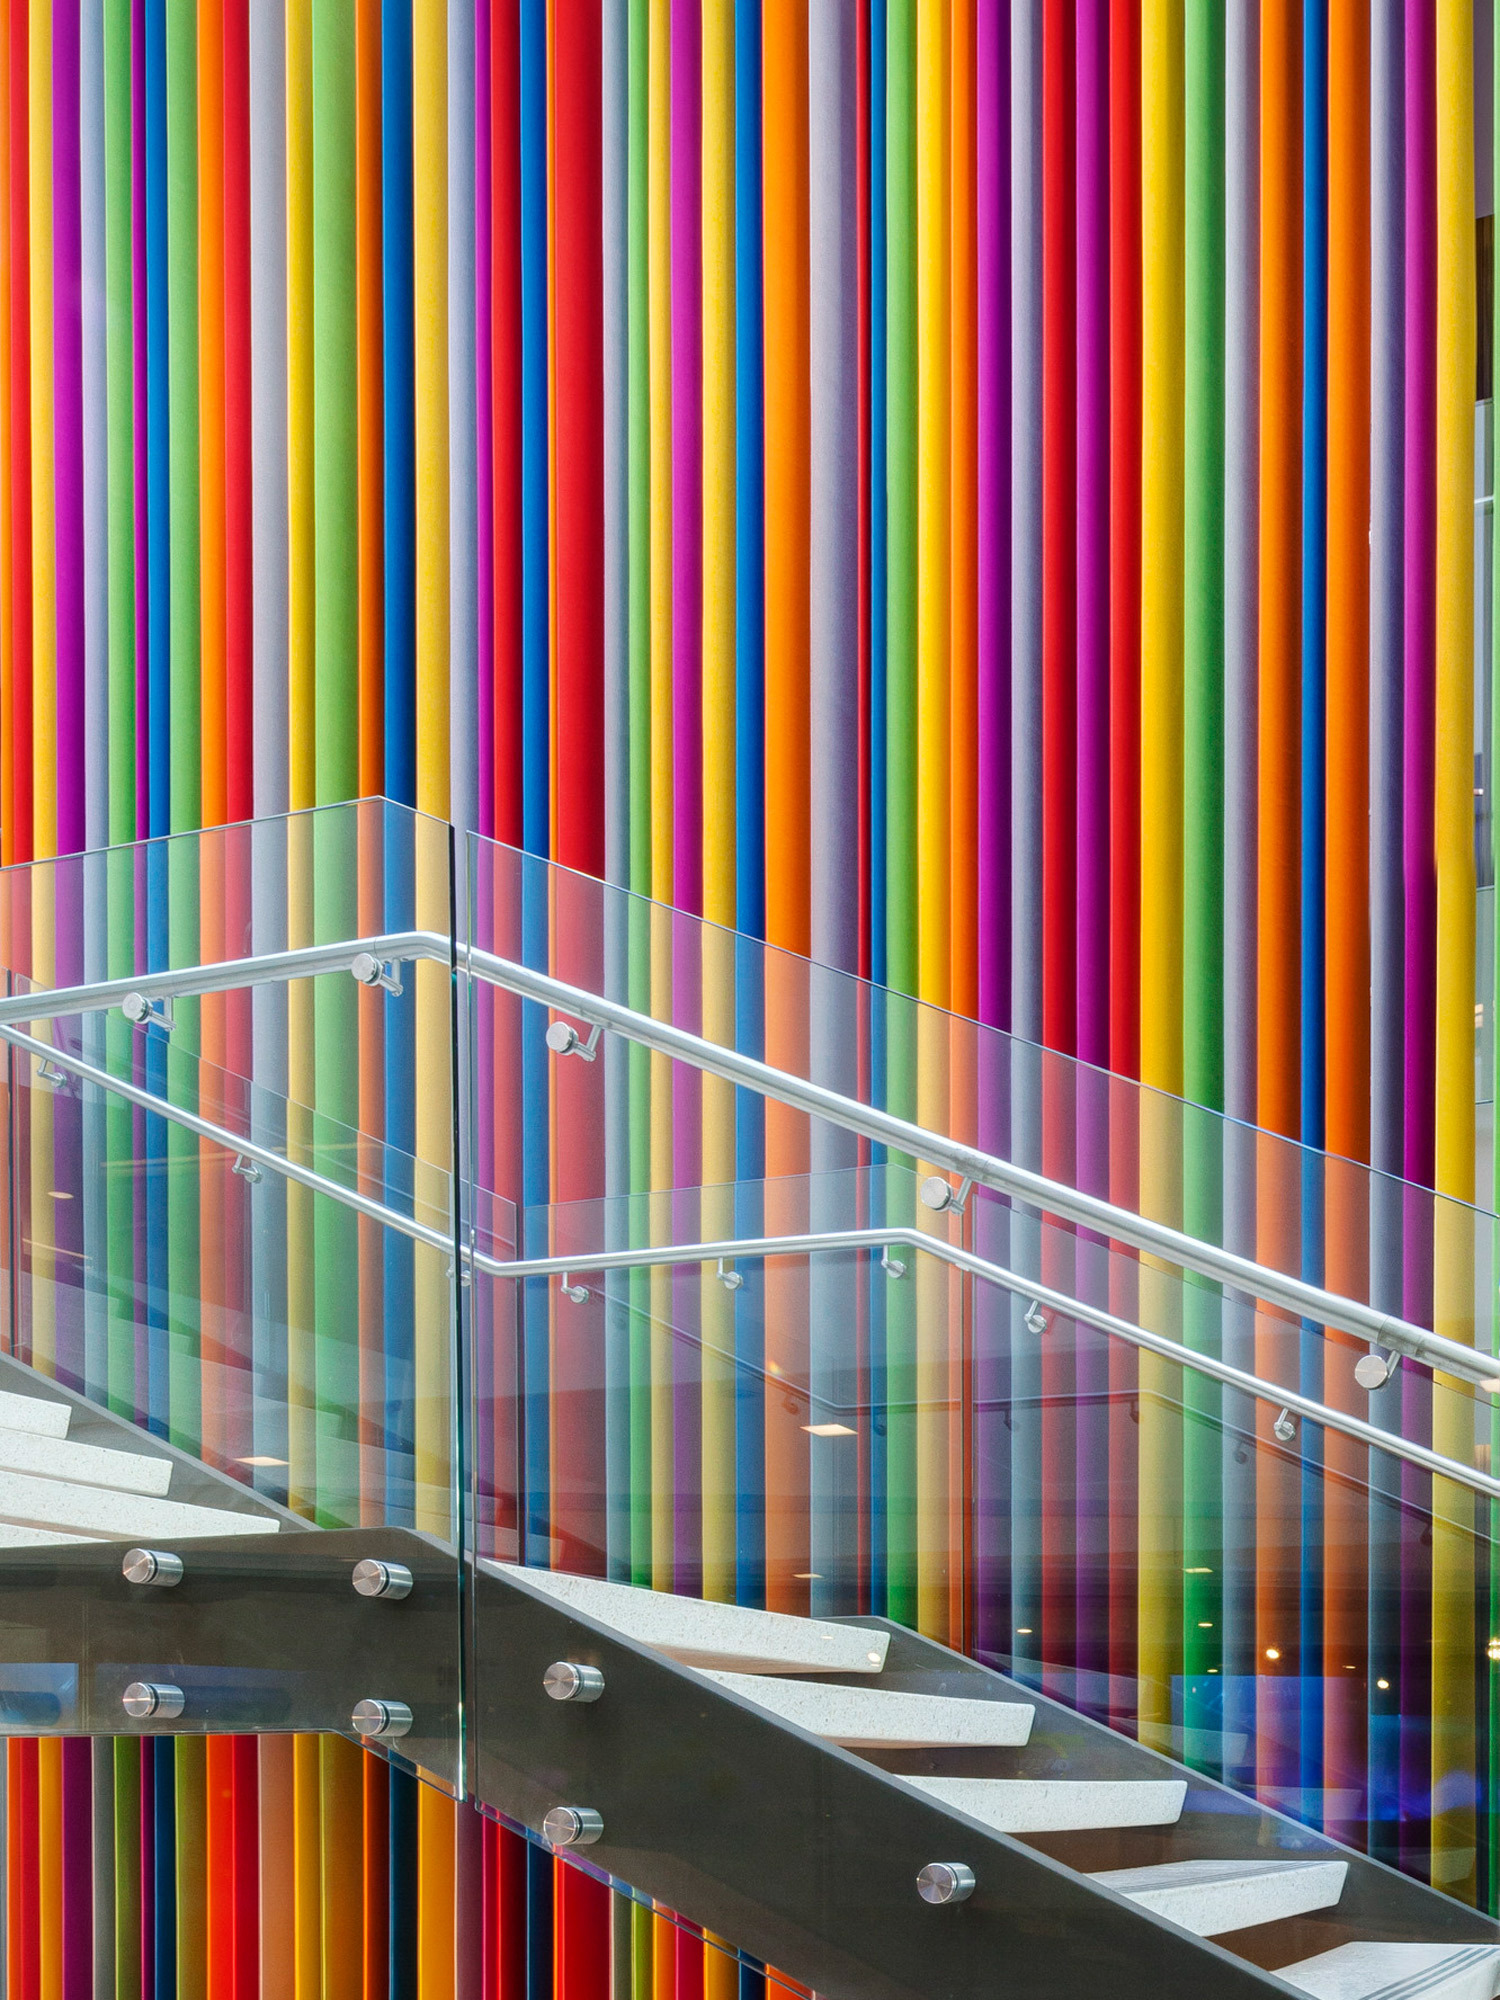 Modern staircase alongside a vibrant, multicolored vertical striped wall feature. Glass balustrades provide a minimalist contrast to the playful, rainbow-colored backdrop, illustrating a bold use of color in contemporary interior design.